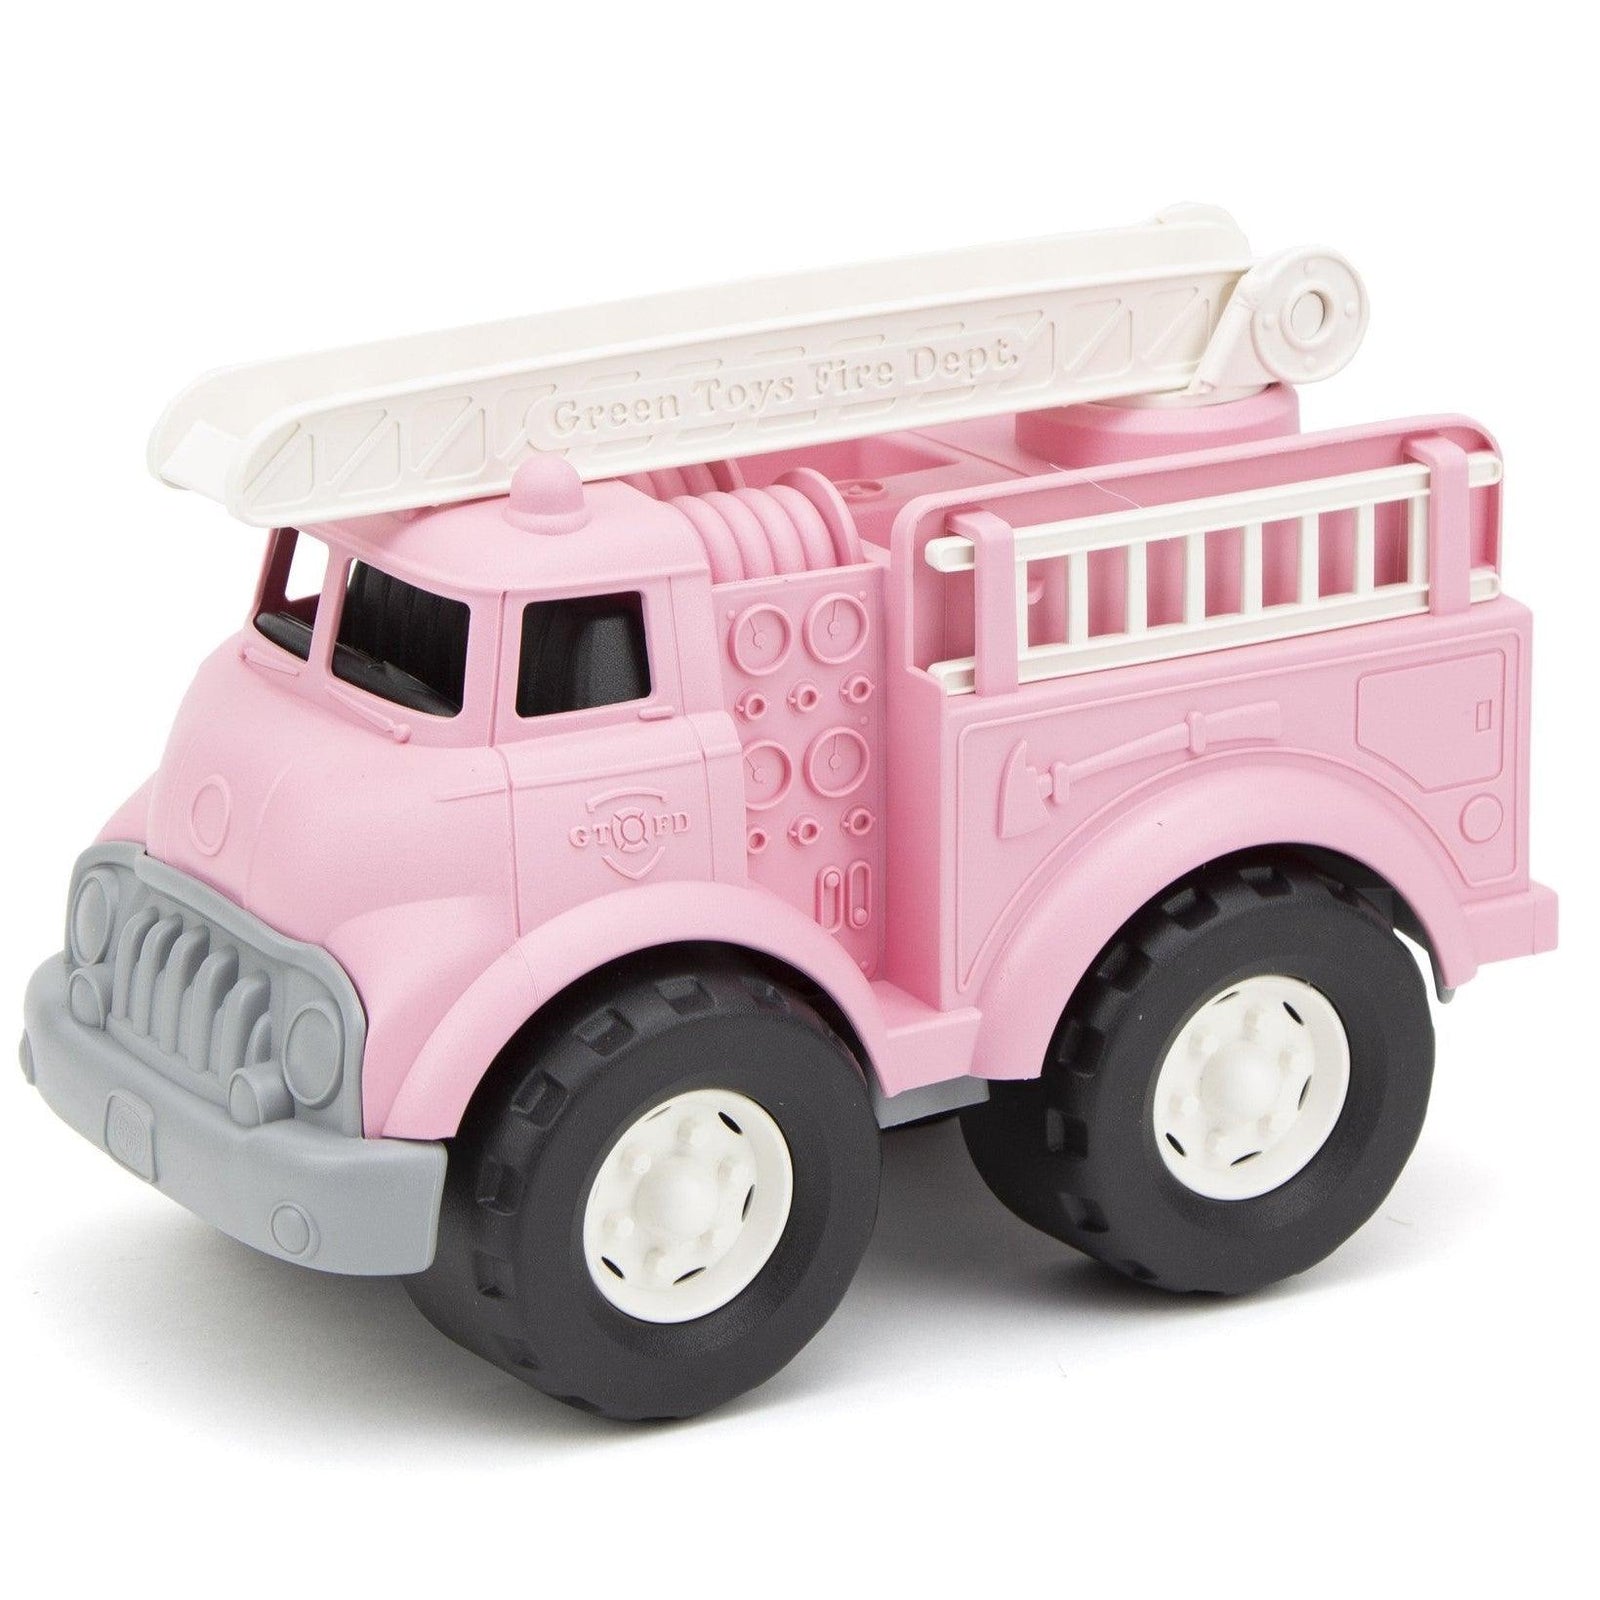 Green Toys: Pink Fire Truck Pink